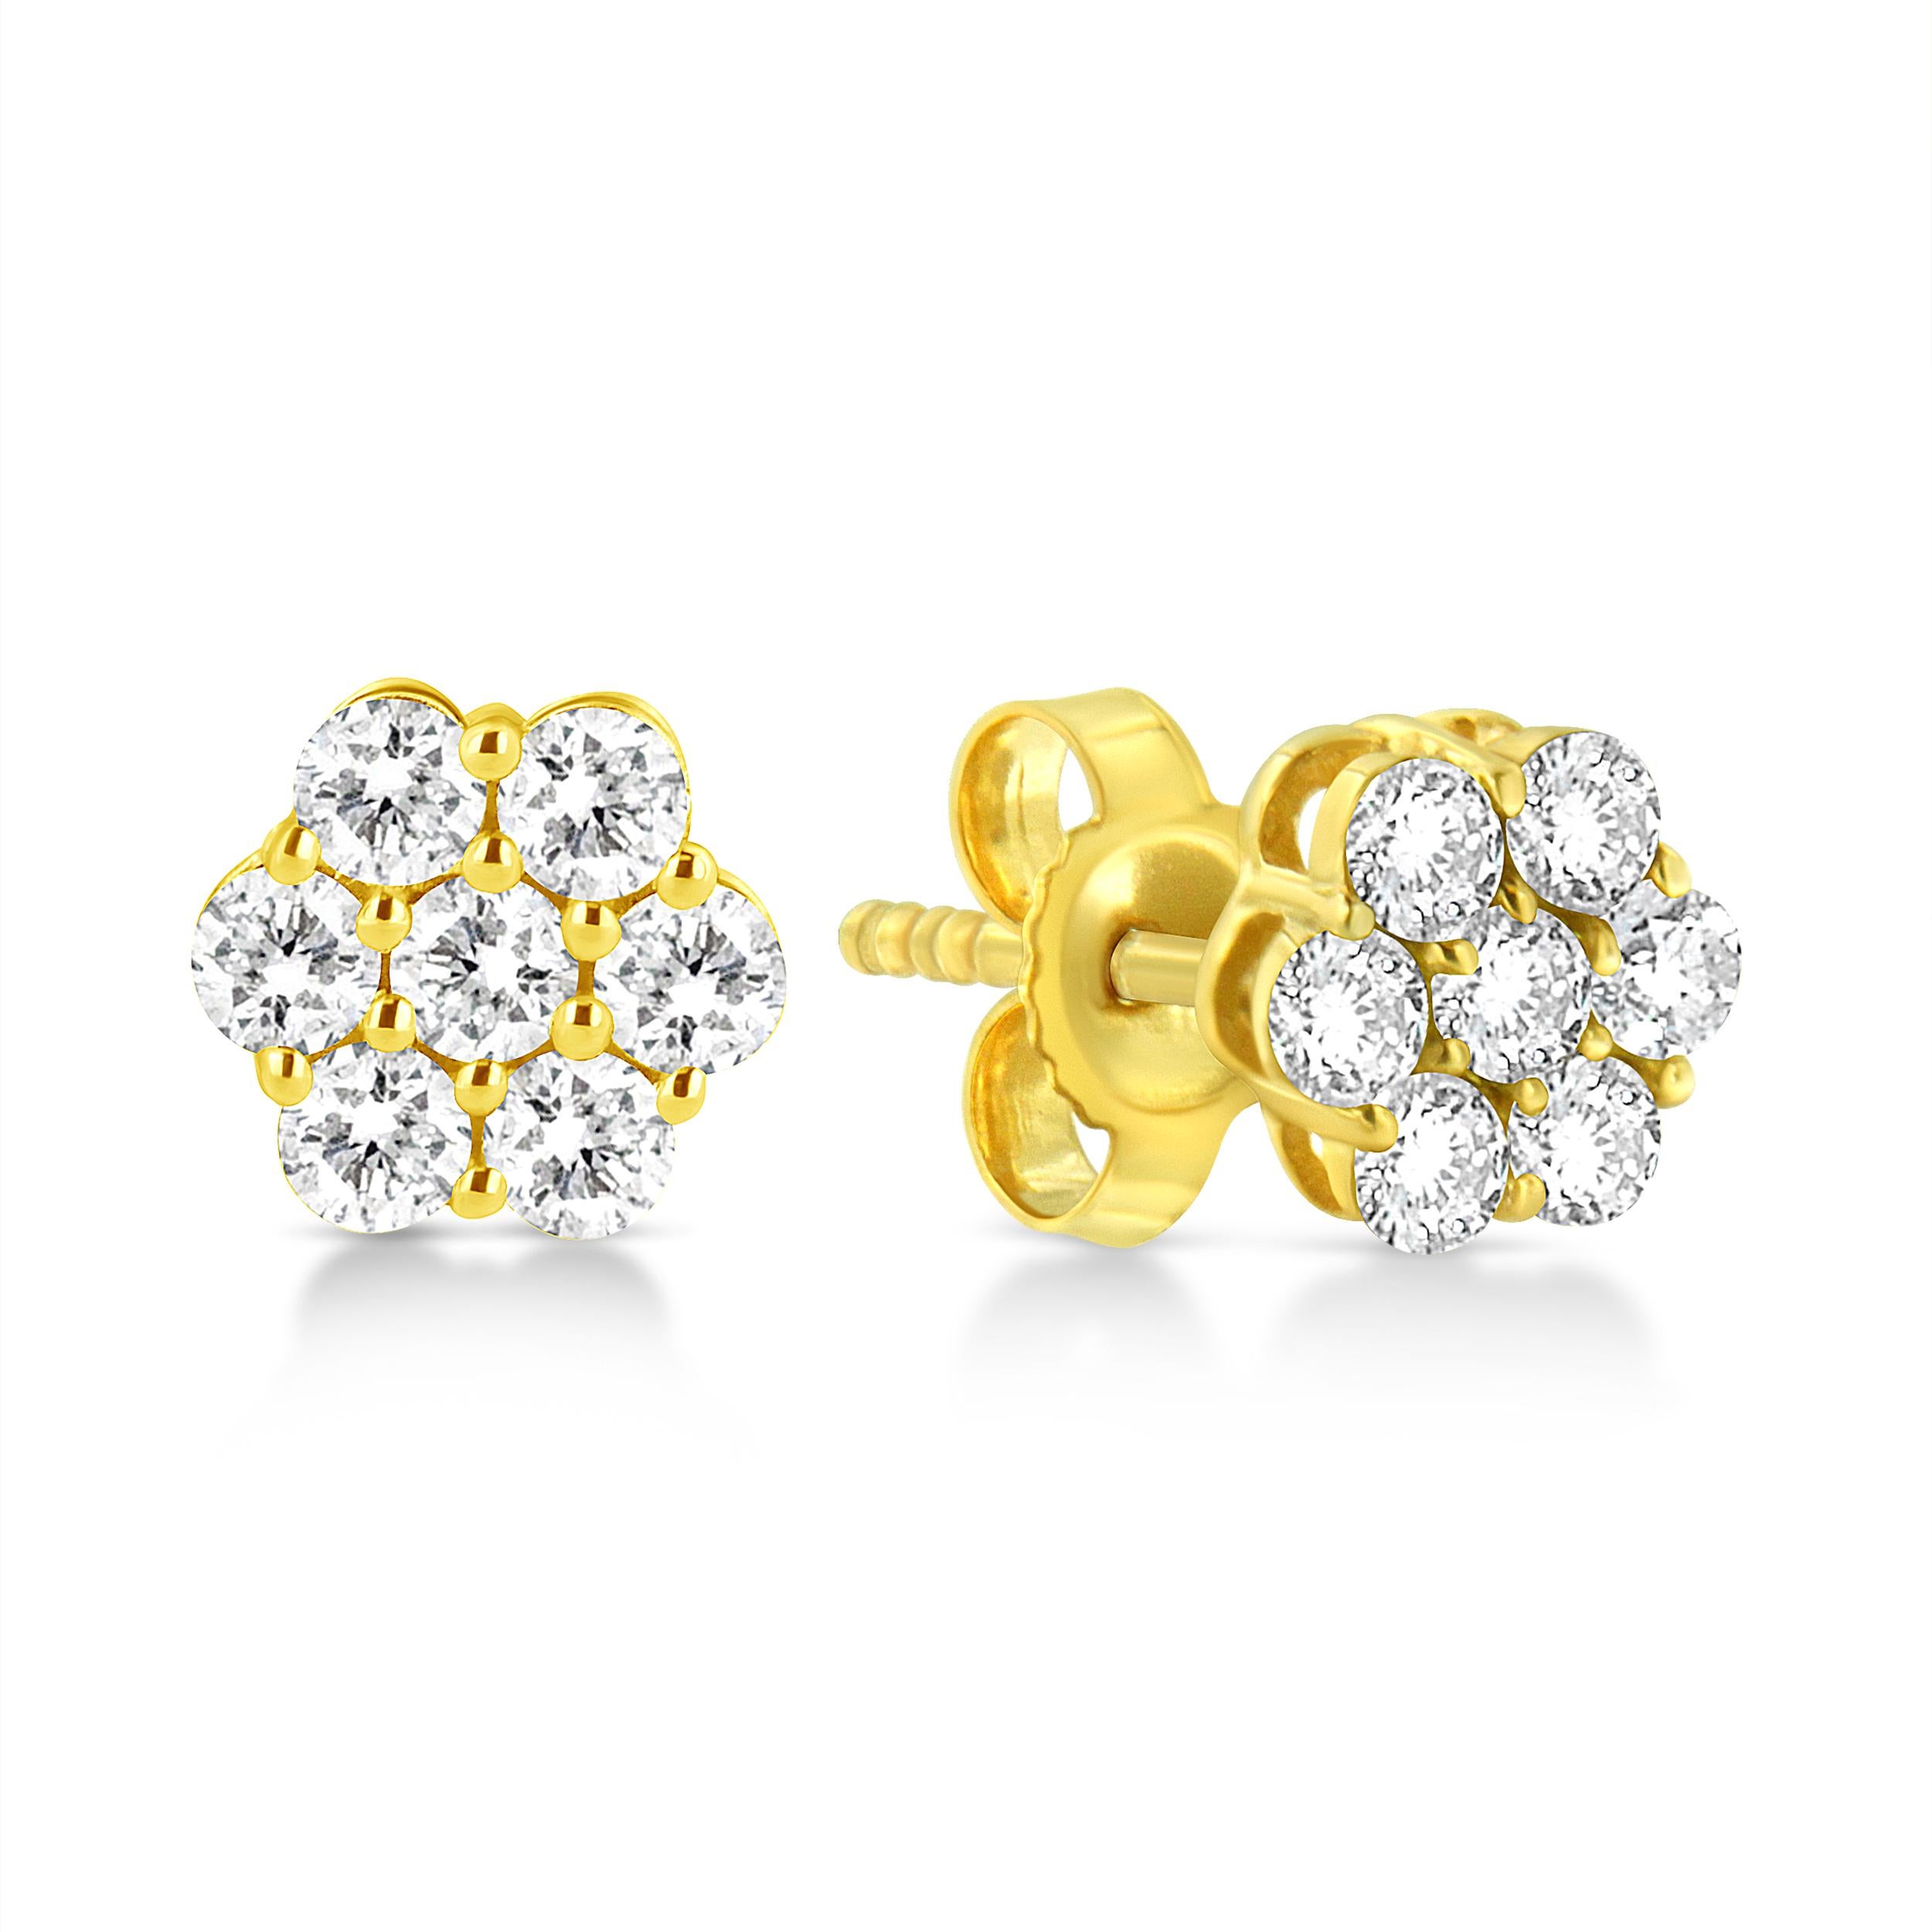 You've been looking for studs for your everyday wear, and now you've found them! Add these elegant floral studs to your jewelry collection and you'll have the perfect bling to wear to any occasion. Natural, round-cut diamonds are set in sparkling